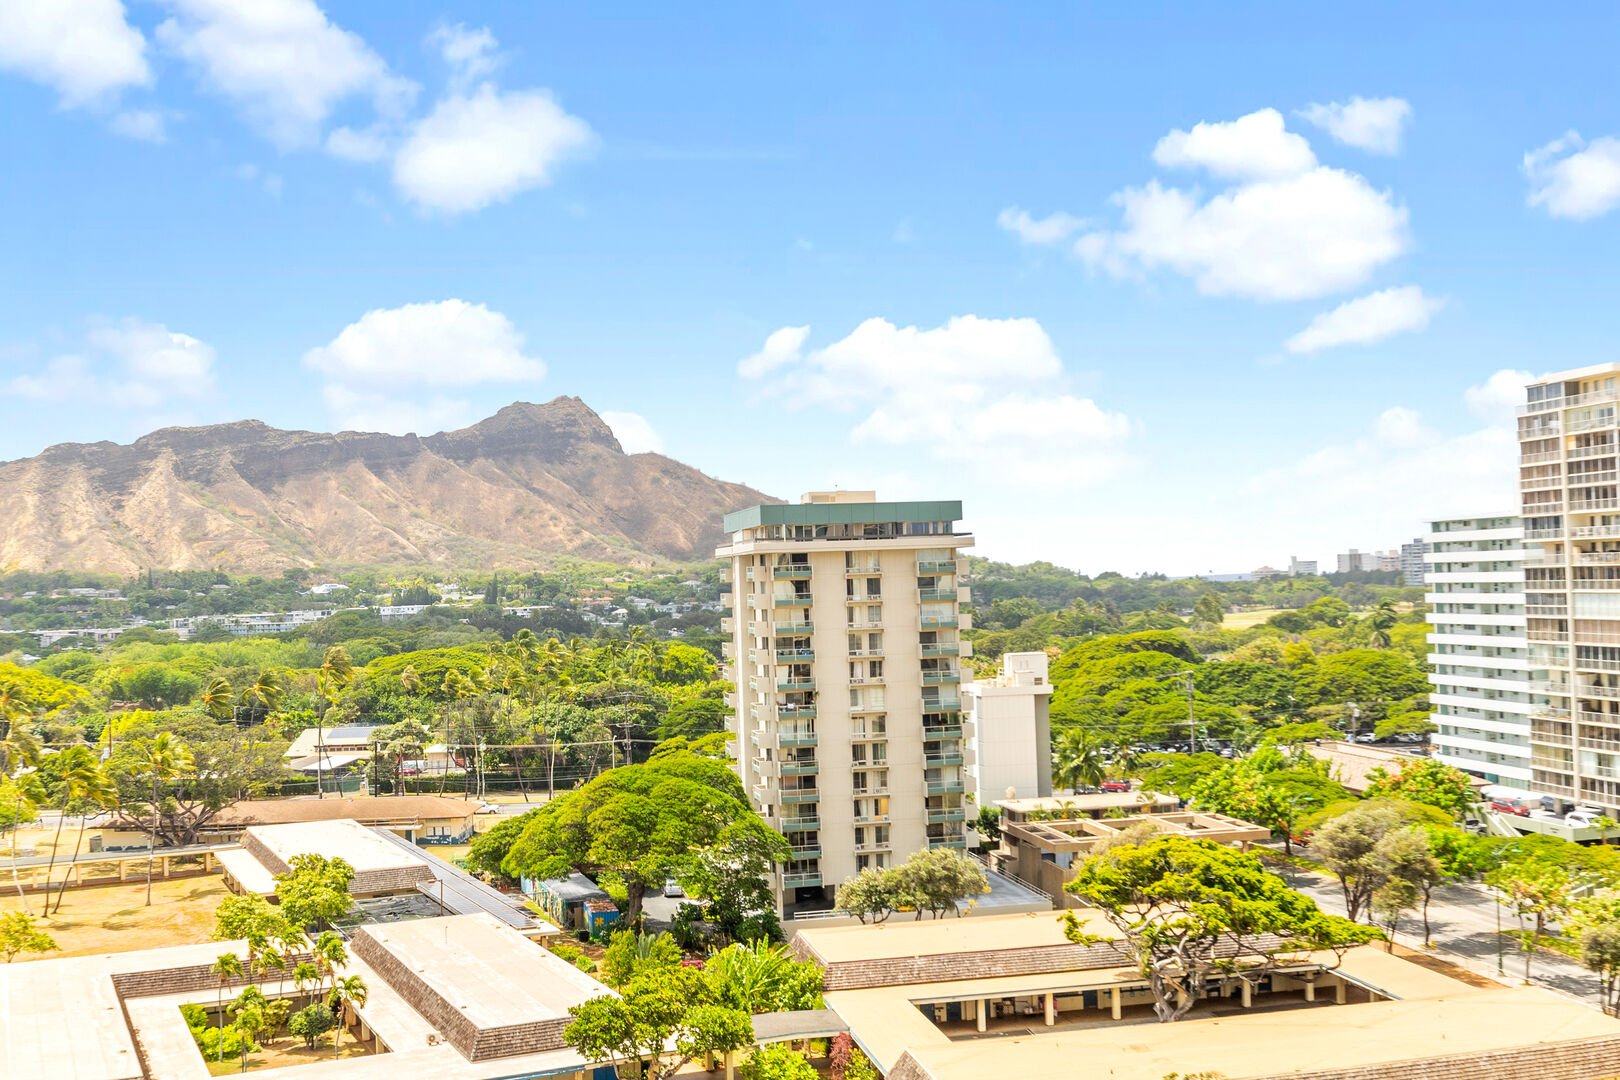 Enjoy the stunning view of the Diamond Head mountain from your balcony!